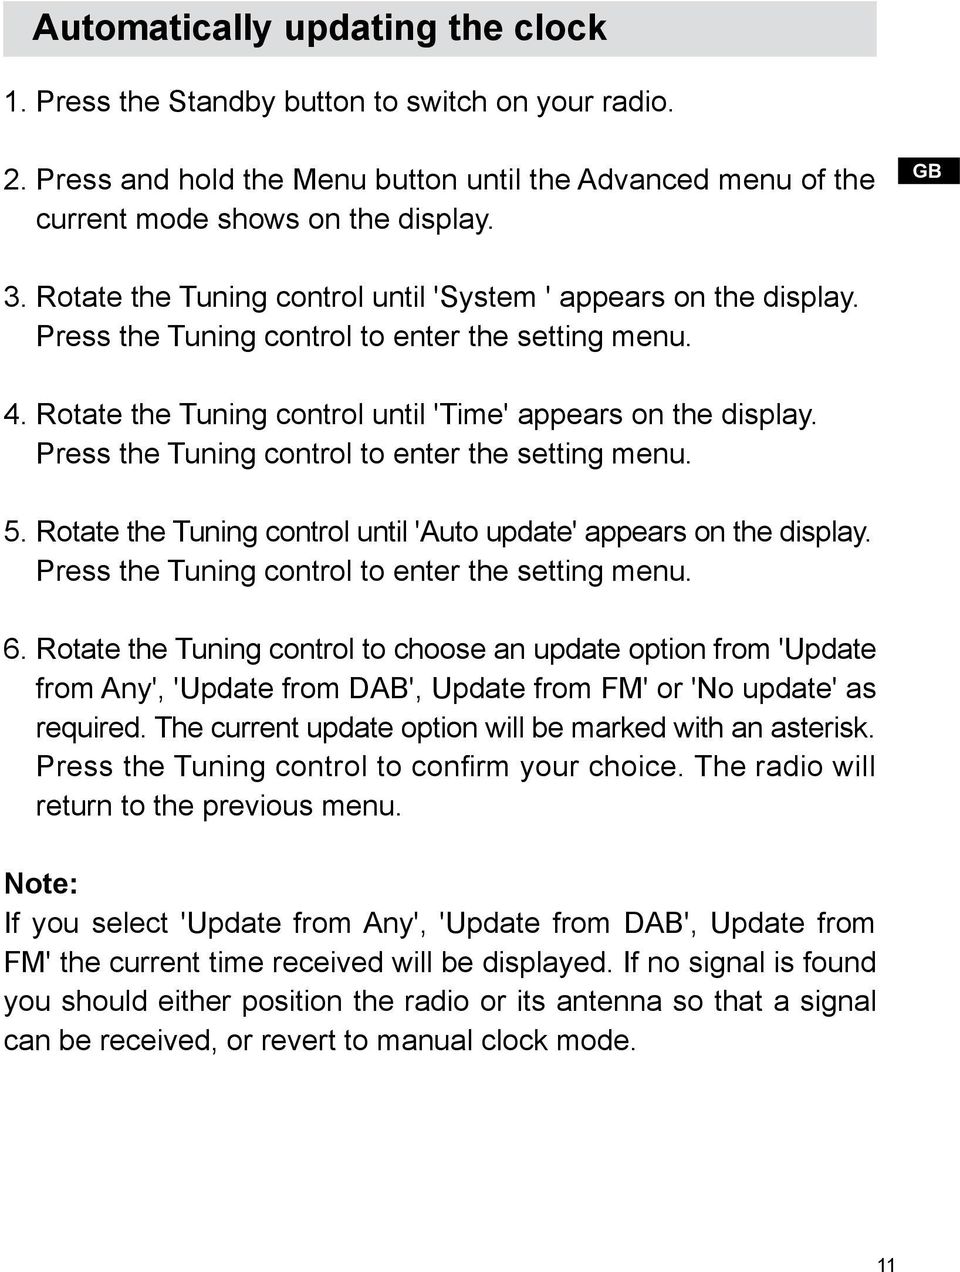 Press the Tuning control to enter the setting menu. 5. Rotate the Tuning control until 'Auto update' appears on the display. Press the Tuning control to enter the setting menu. 6.